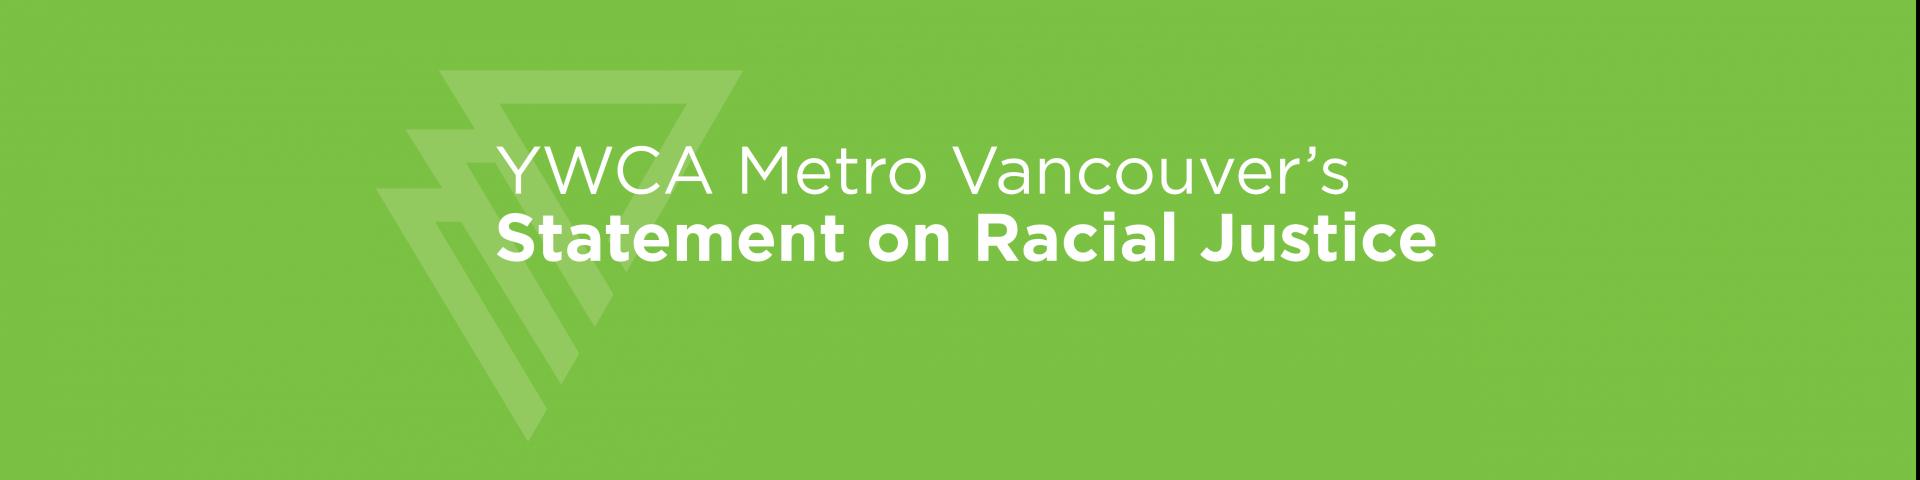 YWCA Metro Vancouver’s Statement on Racial Justice 